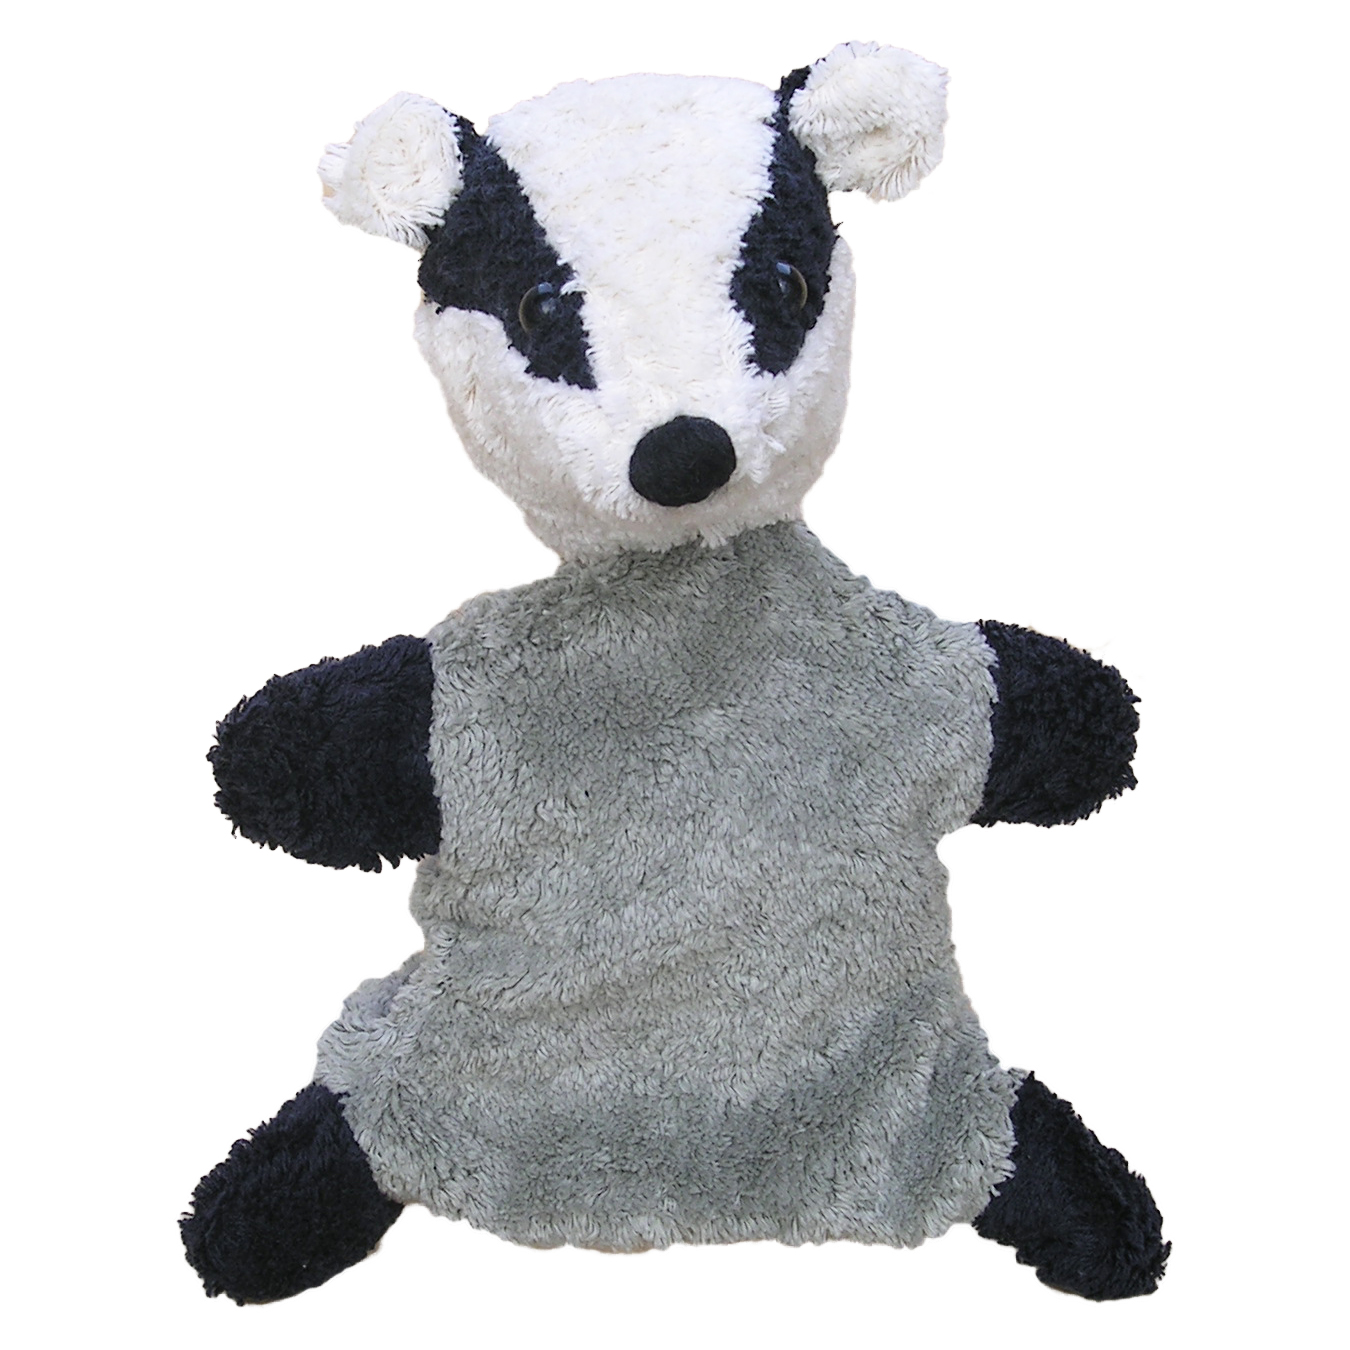 Hand puppet badger - made of natural material - by Kallisto